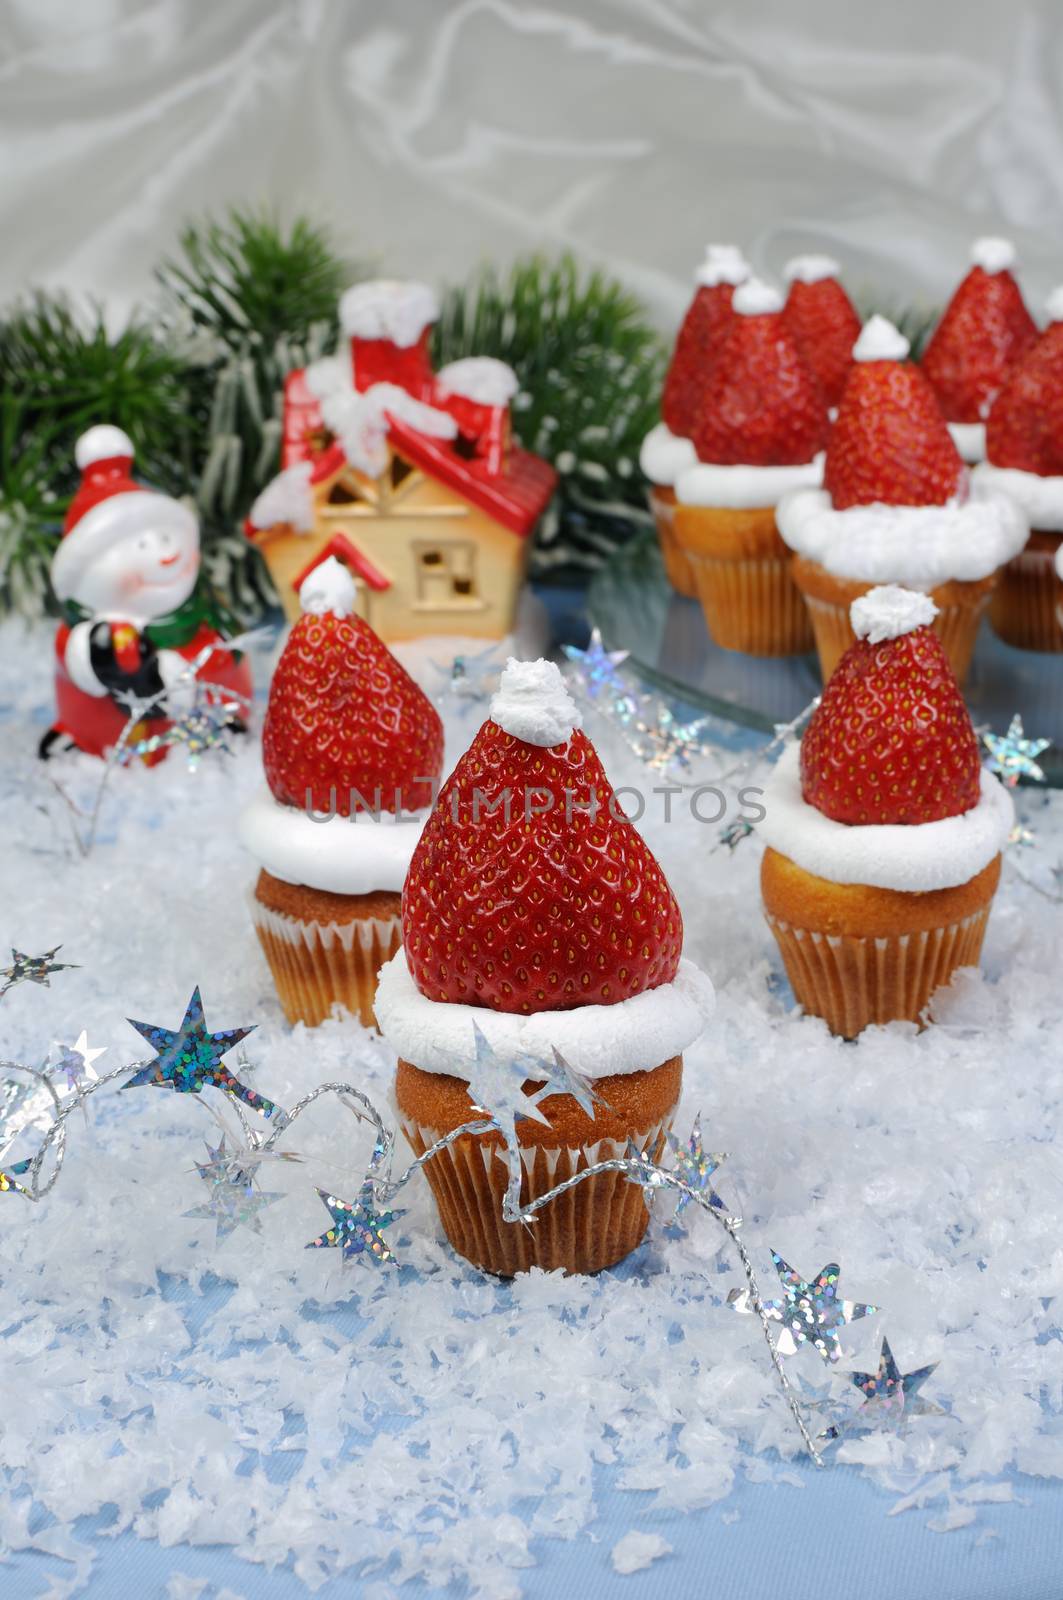 Christmas muffins by Apolonia